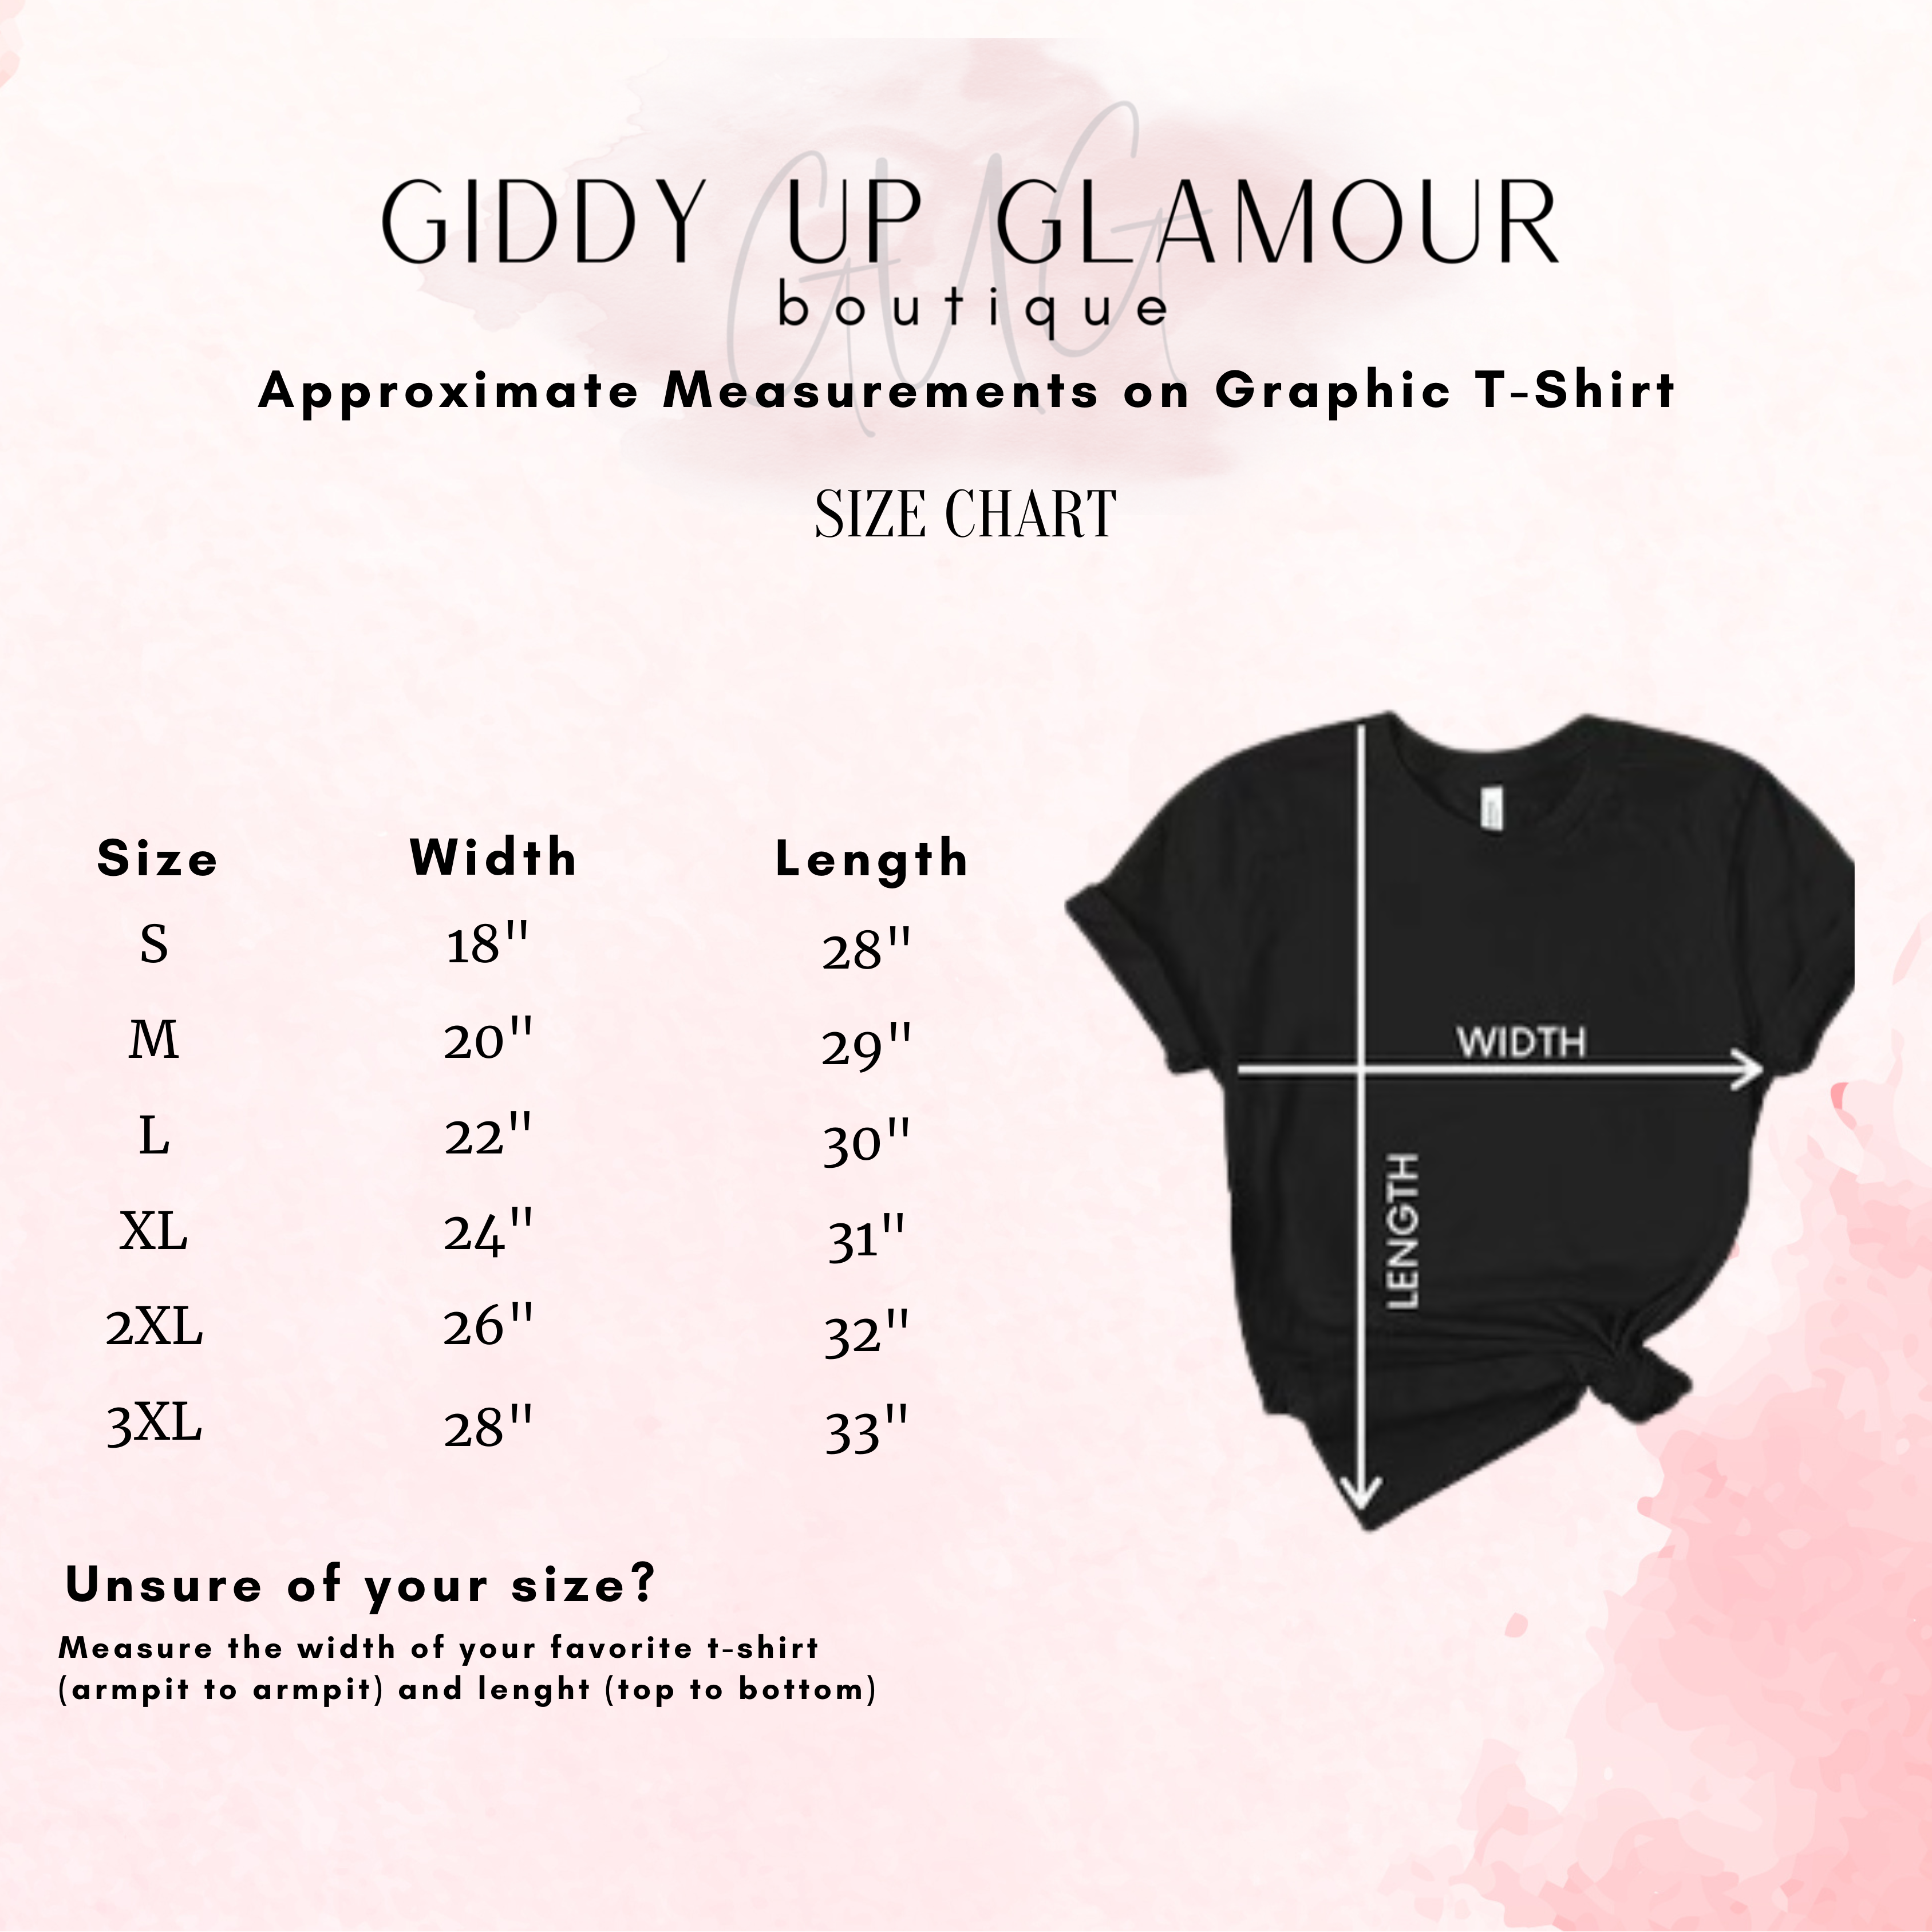 Saddle Up Buttercup Short Sleeve Graphic Tee in Mauve Pink - Giddy Up Glamour Boutique